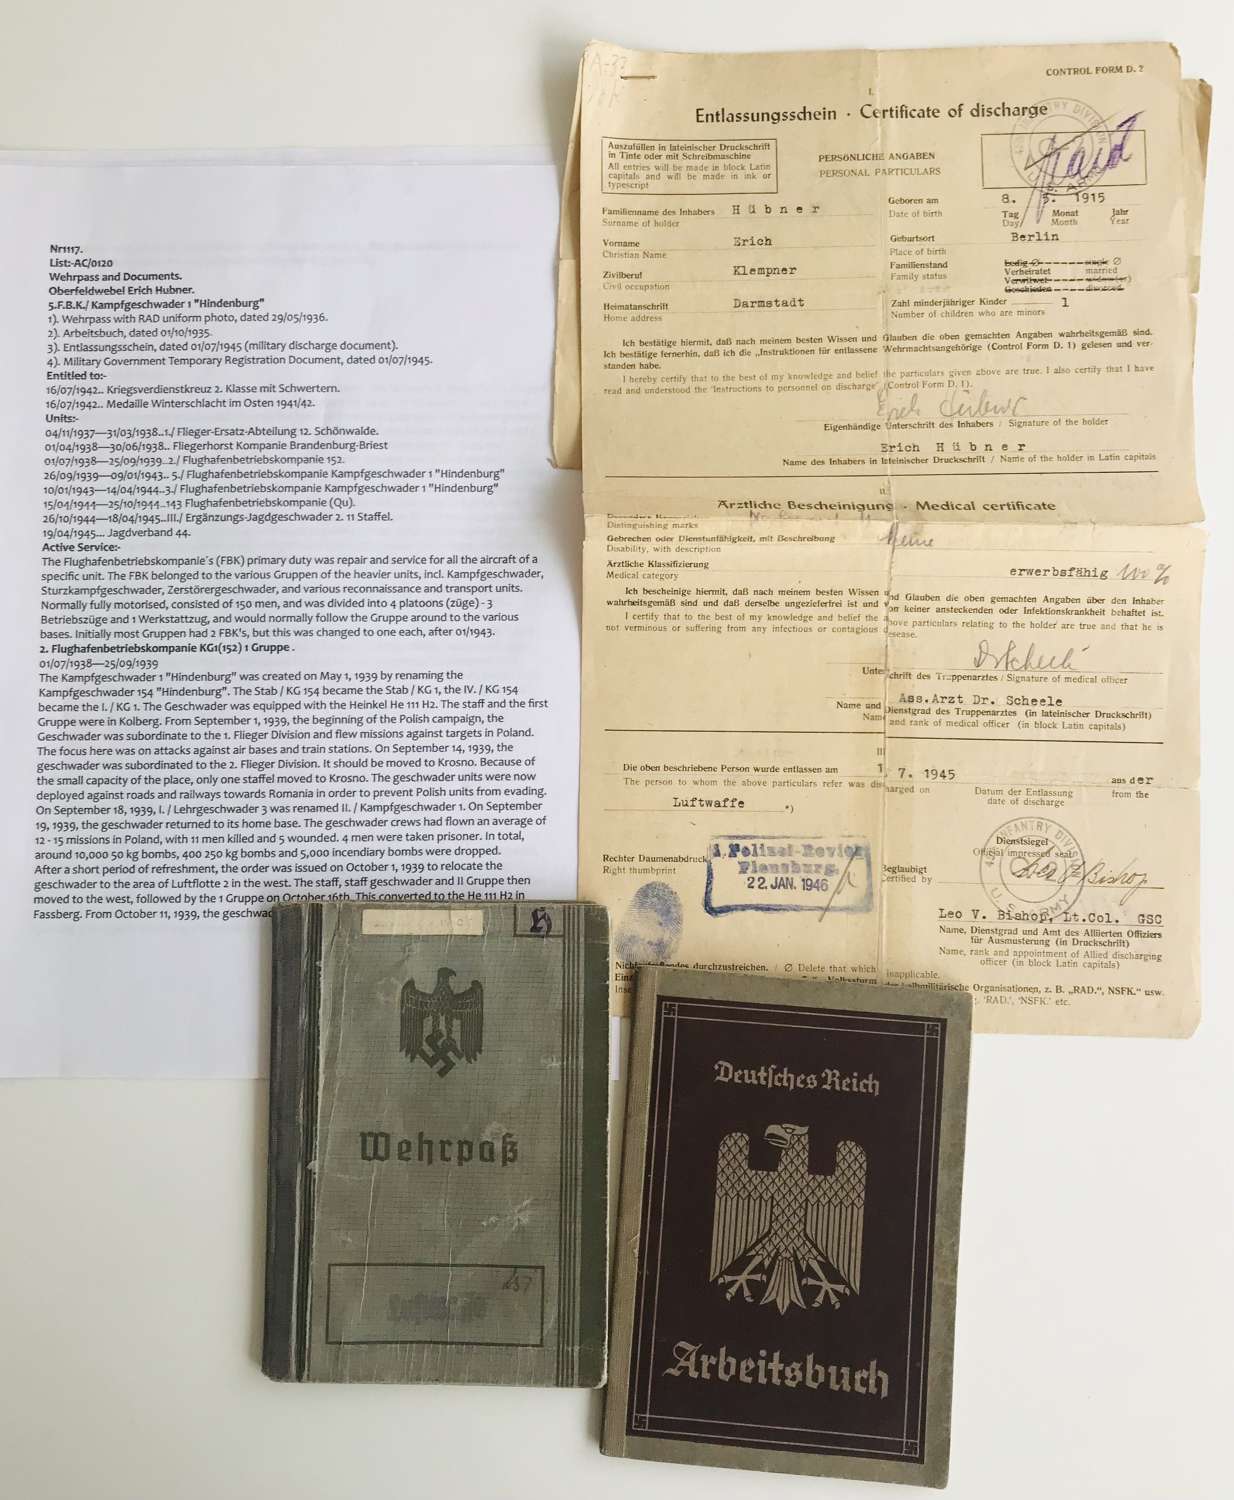 Wehrpass and documents to KG1 “Hindenburg”and JV44